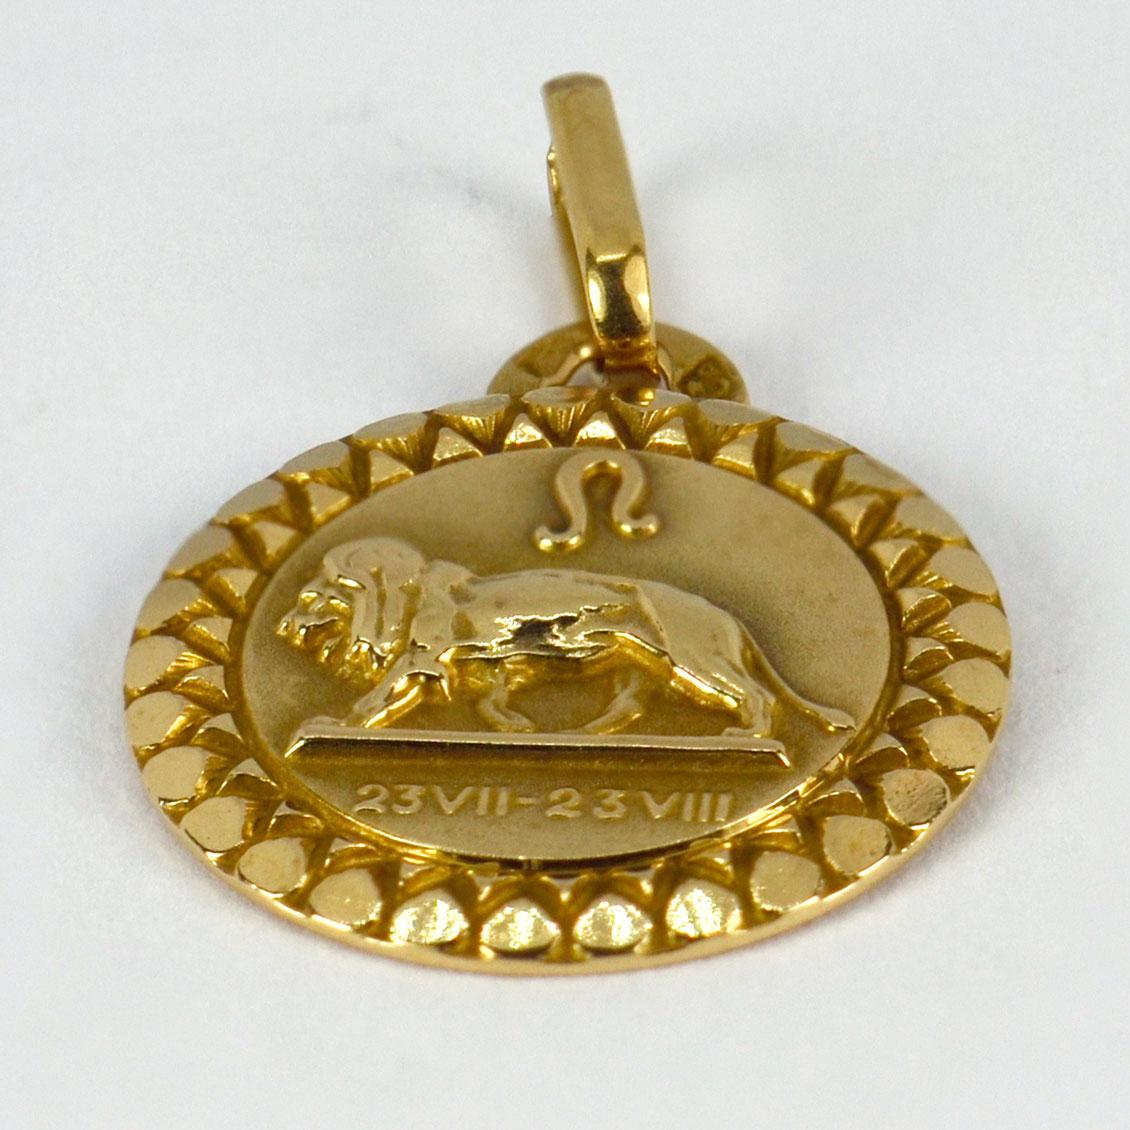 An 18 karat (18K) yellow gold charm pendant designed as the zodiac symbol for Leo, depicting a lion, the astrological symbol for Leo and the dates 23 July - 23 August. Stamped with the eagle’s head for French manufacture and 18 karat gold with an